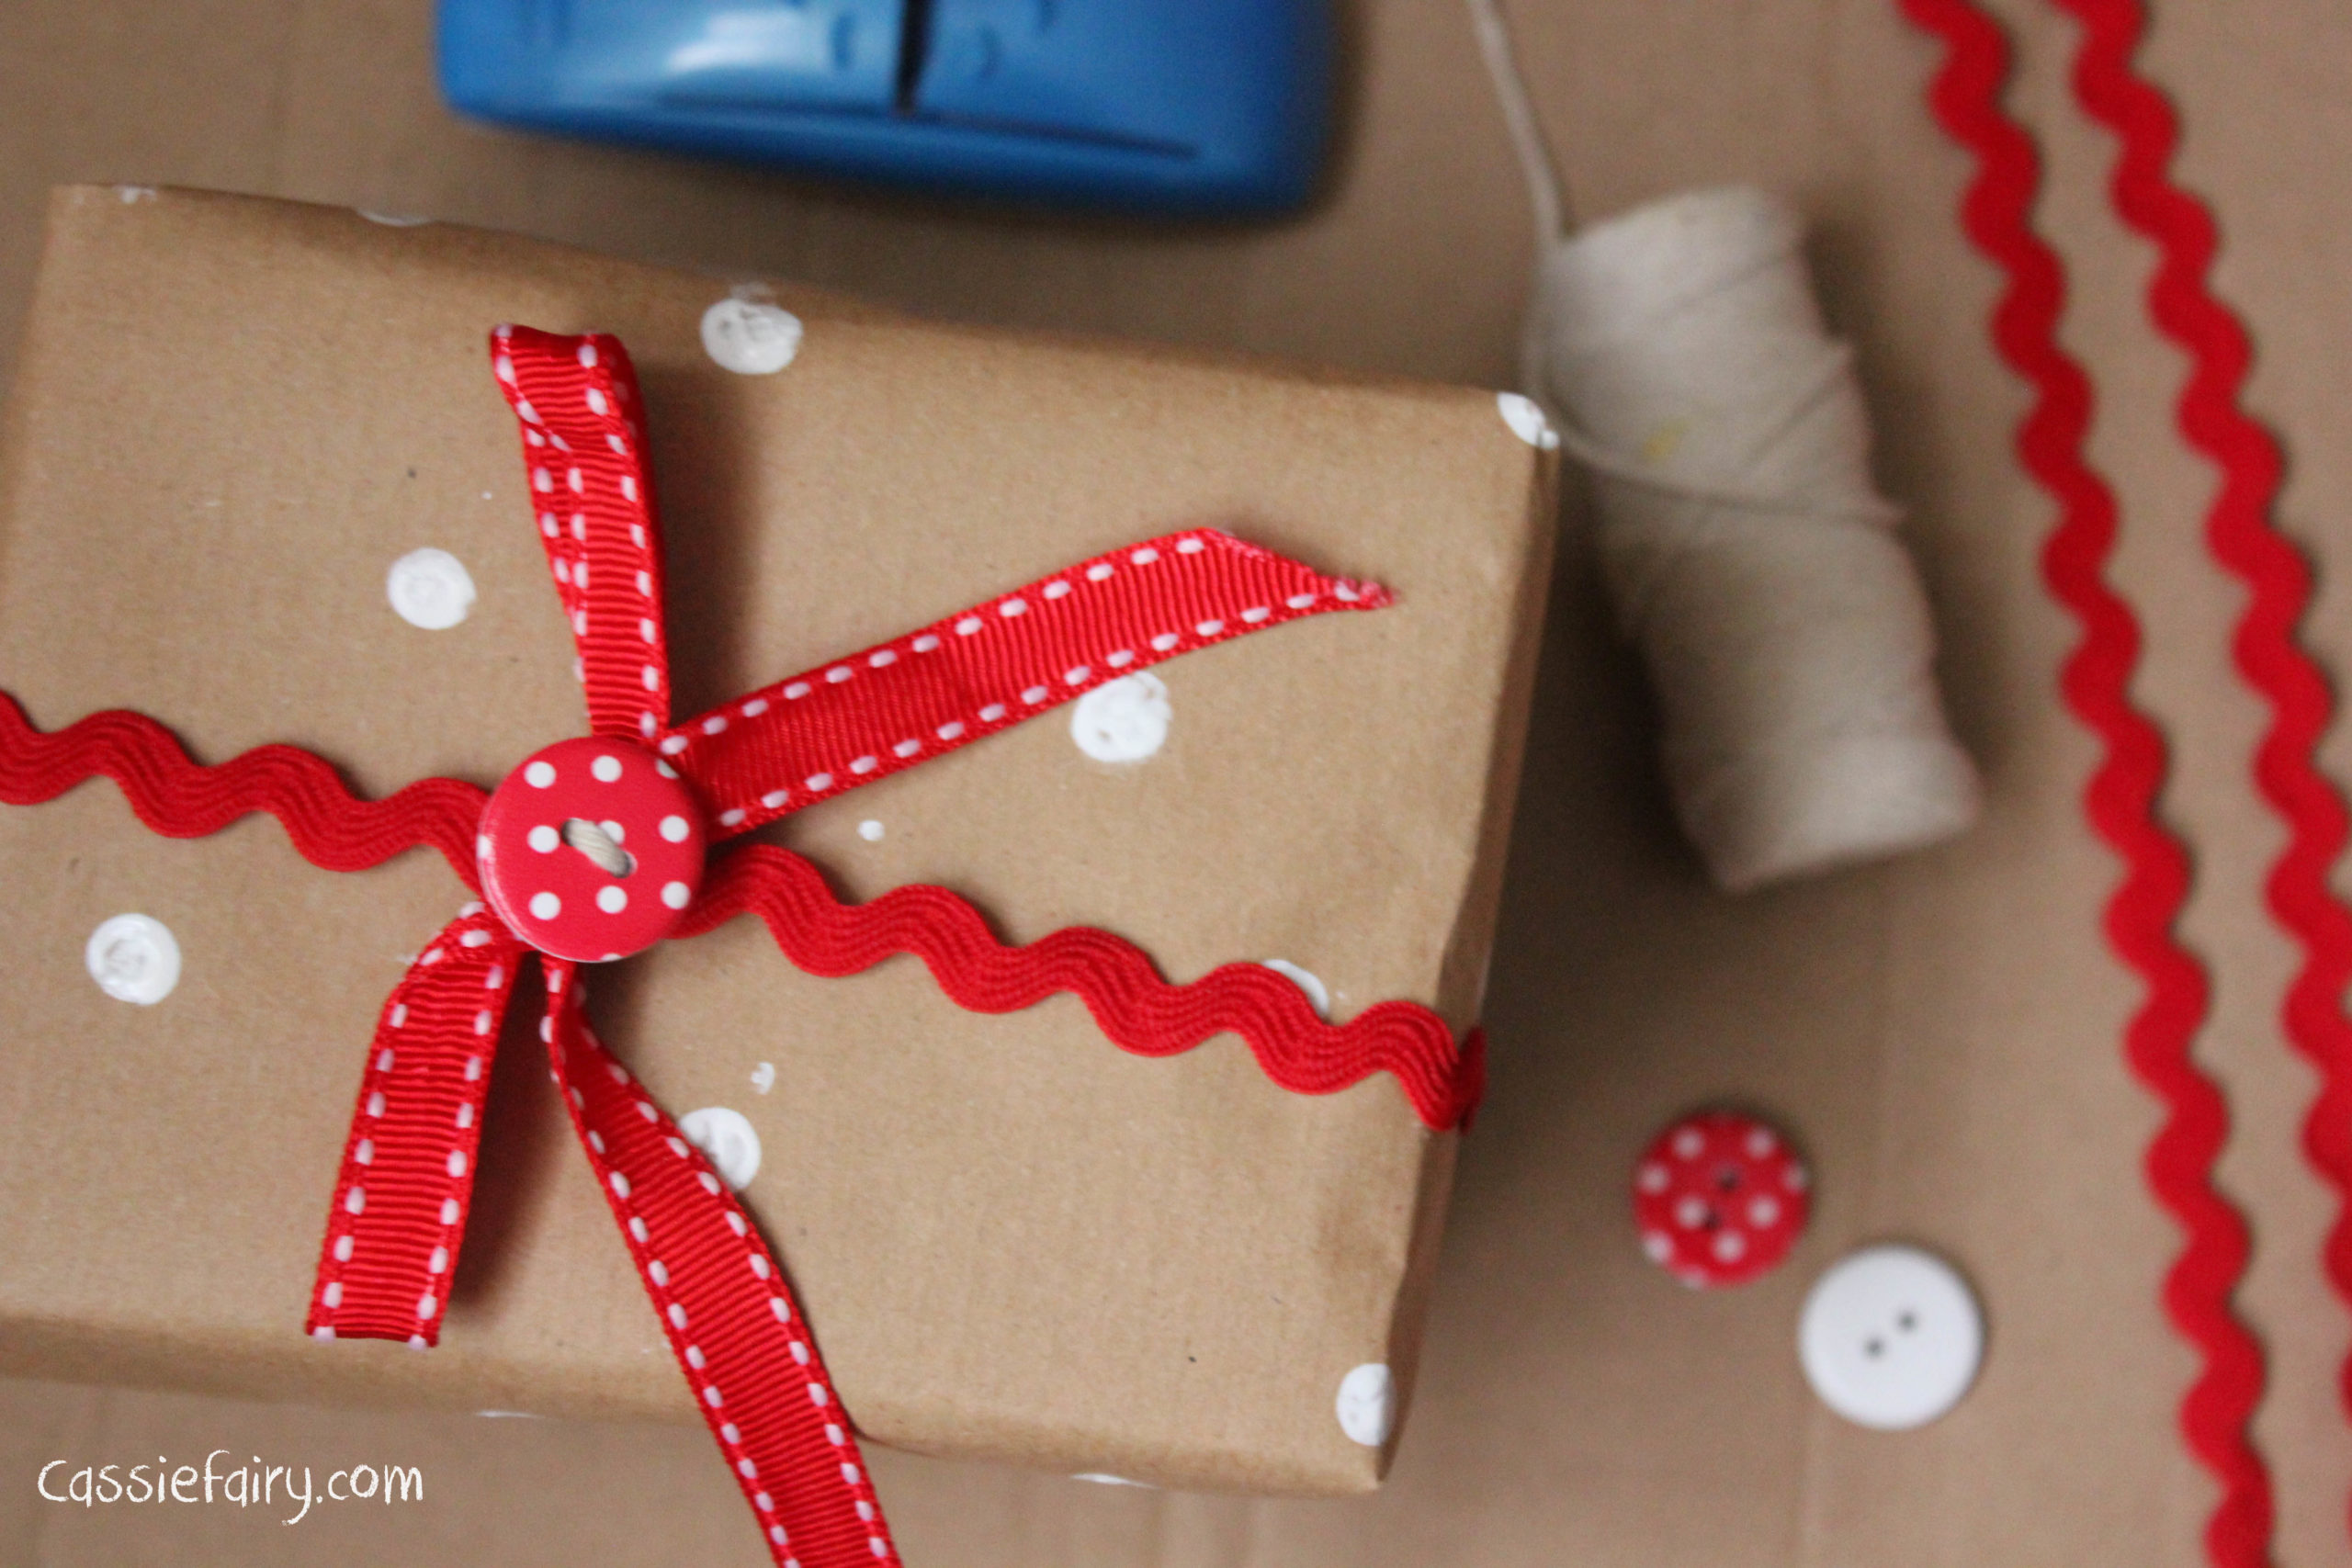 Easy Christmas Gift Wrapping Without Bows - Sanctuary Home Decor